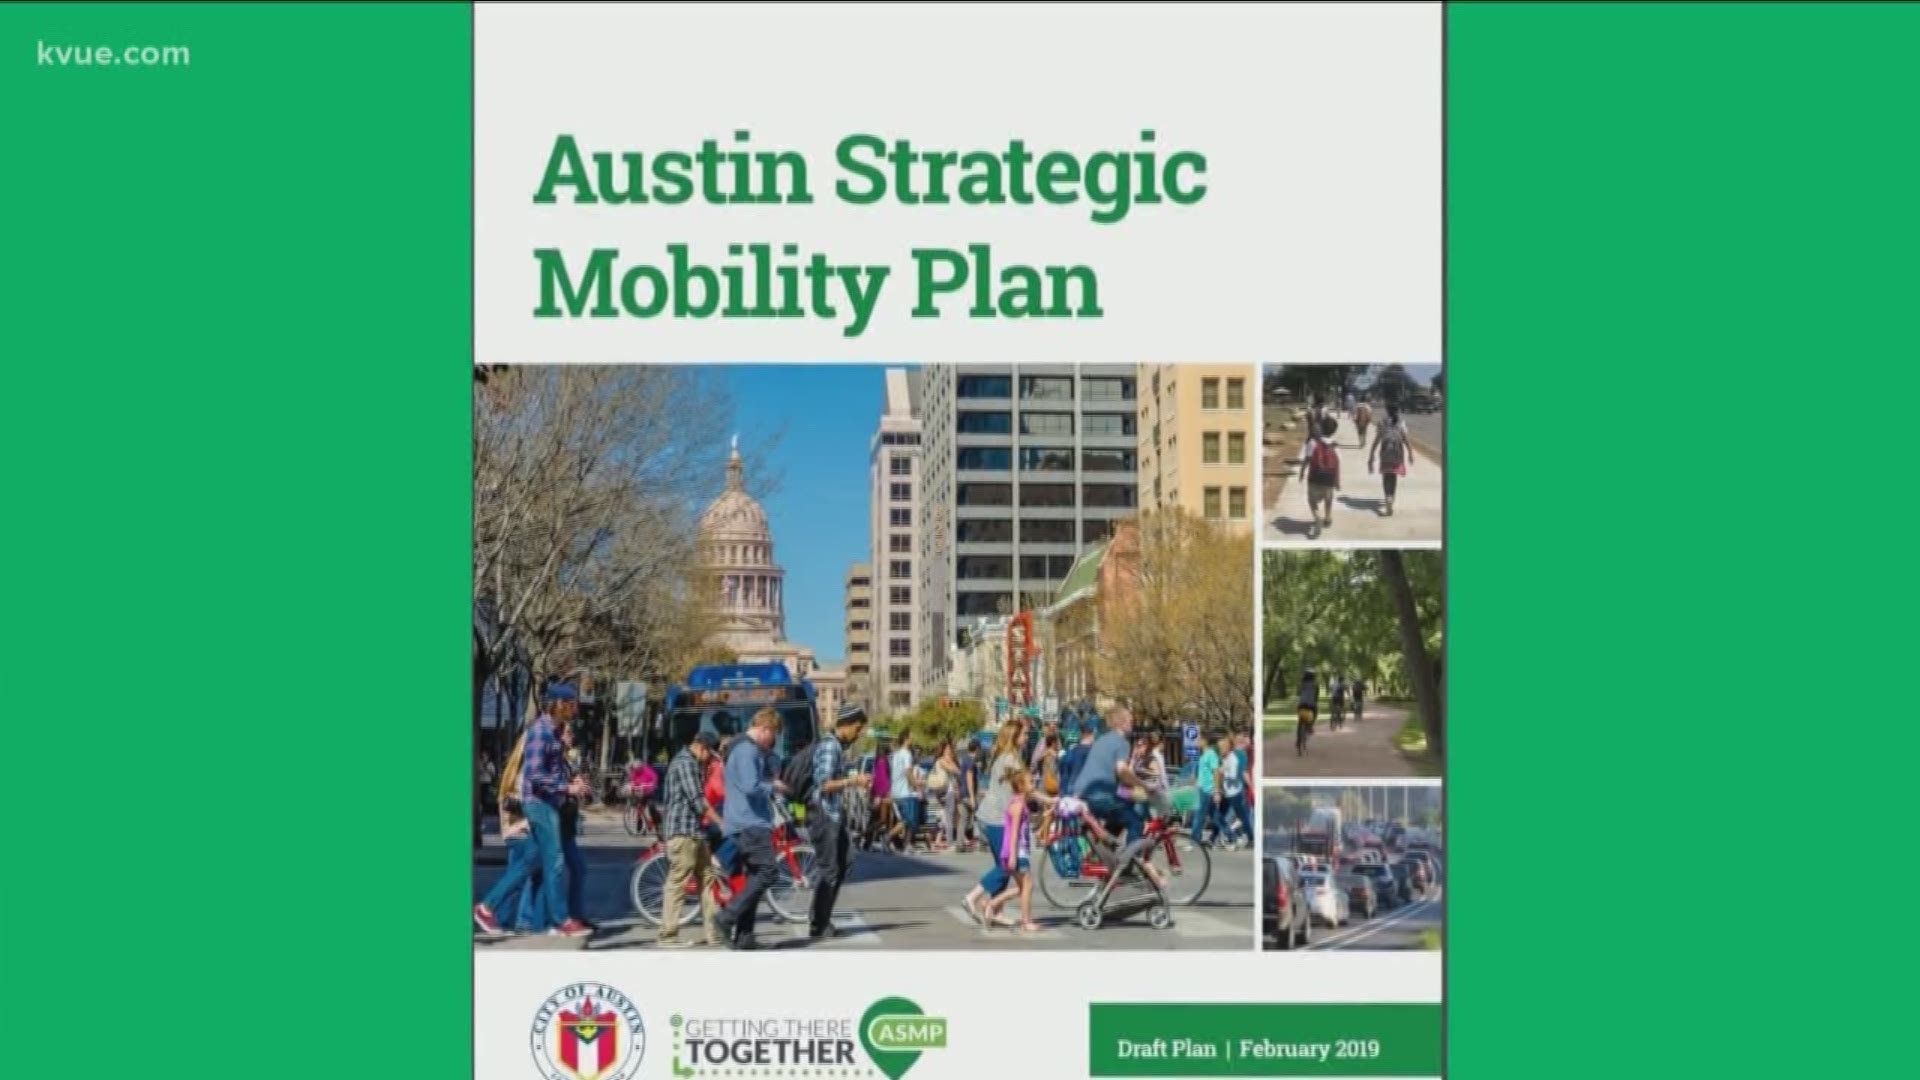 Molly Oak tells us about the City of Austin's mobility plan, which the city council adopted Thursday.